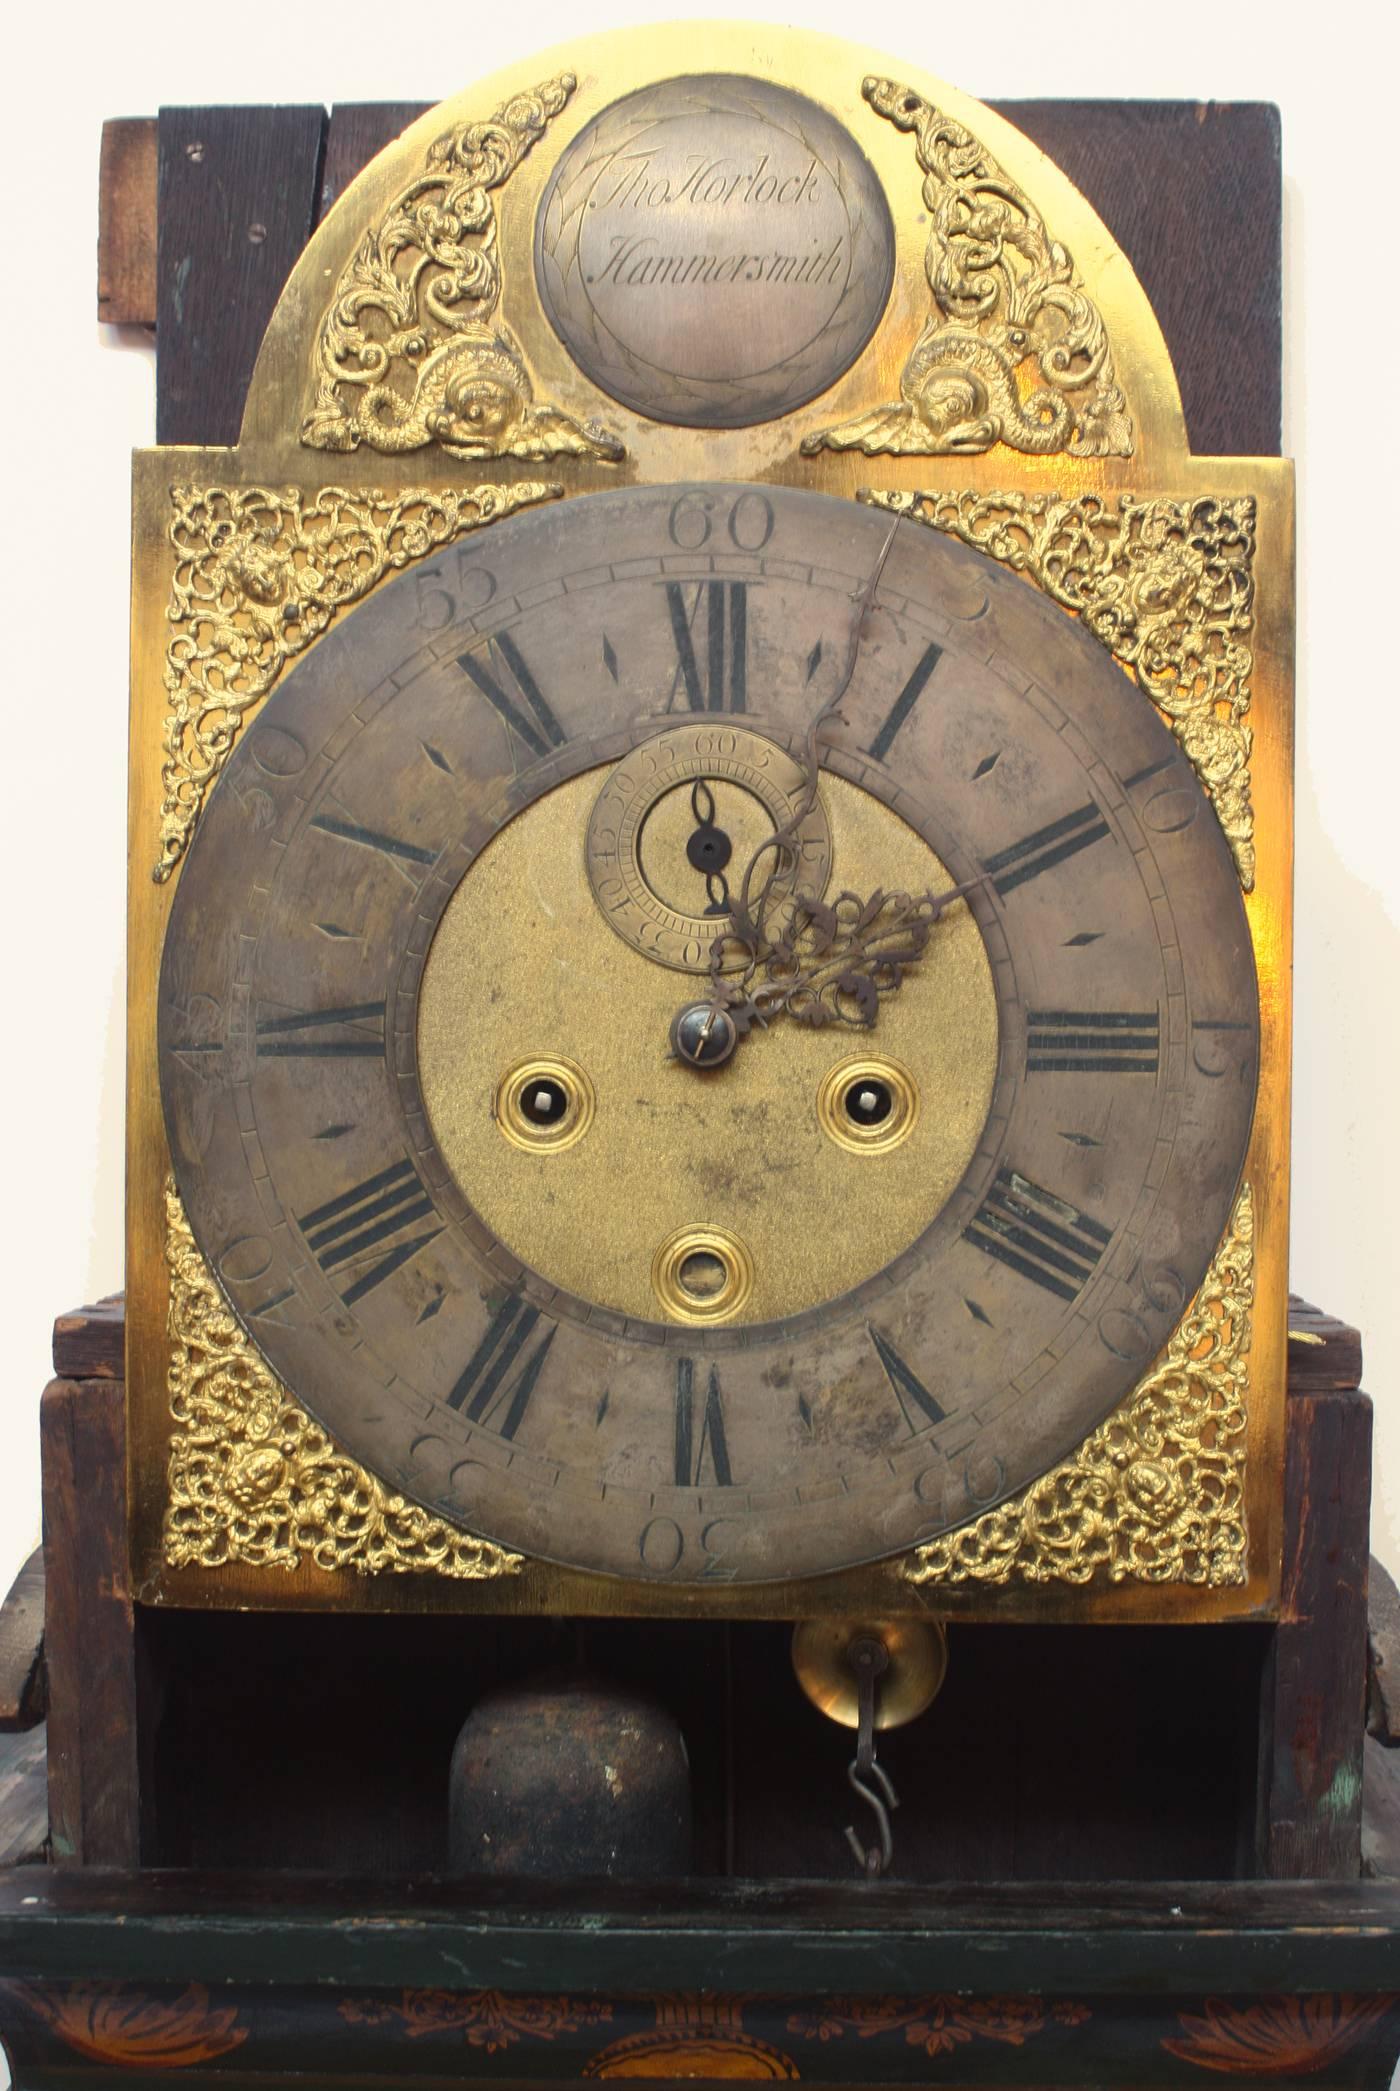 Clock by Thomas Horlock / Hammersmith, with tall green chinoiserie case with gilt decoration including a ship (see Image 1, bottom), face has silvered dial with great patina, painted numbers, chimes, beautiful bell.